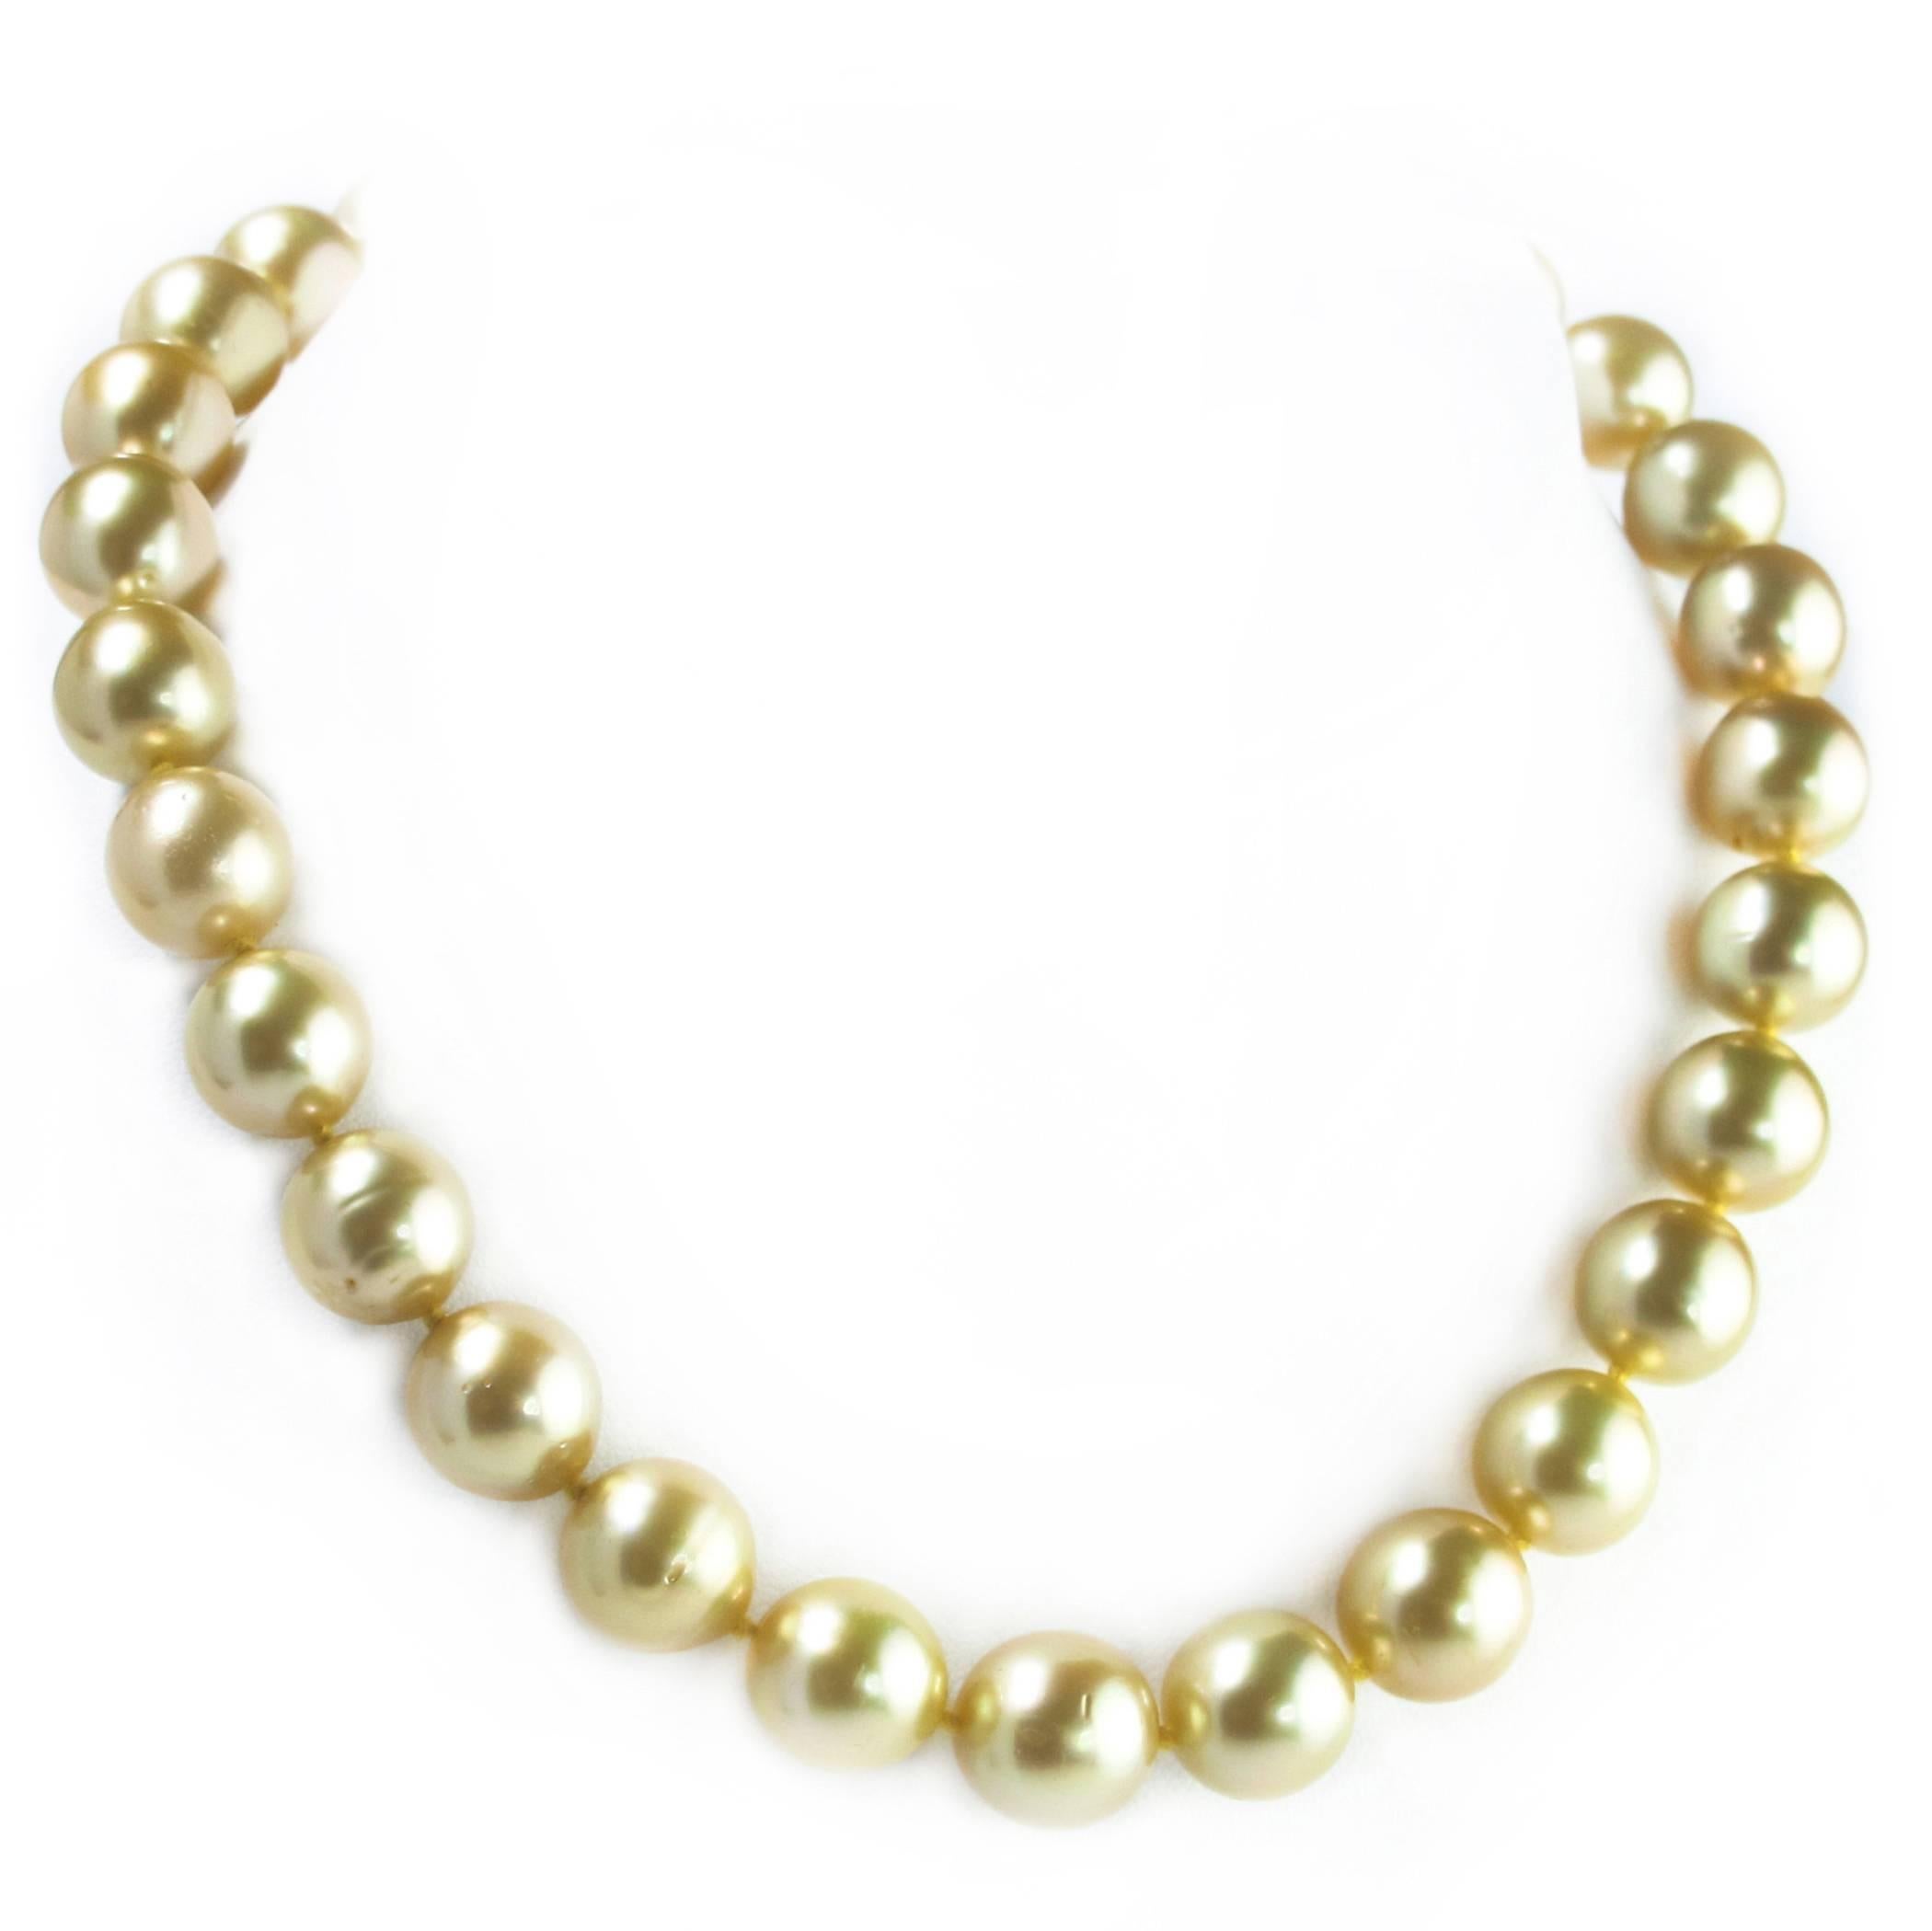 A classic and elegant strand of 12 - 12.5mm Golden South Seas Pearls are hand strung and knotted with a decorative 18K yellow gold clasp.  